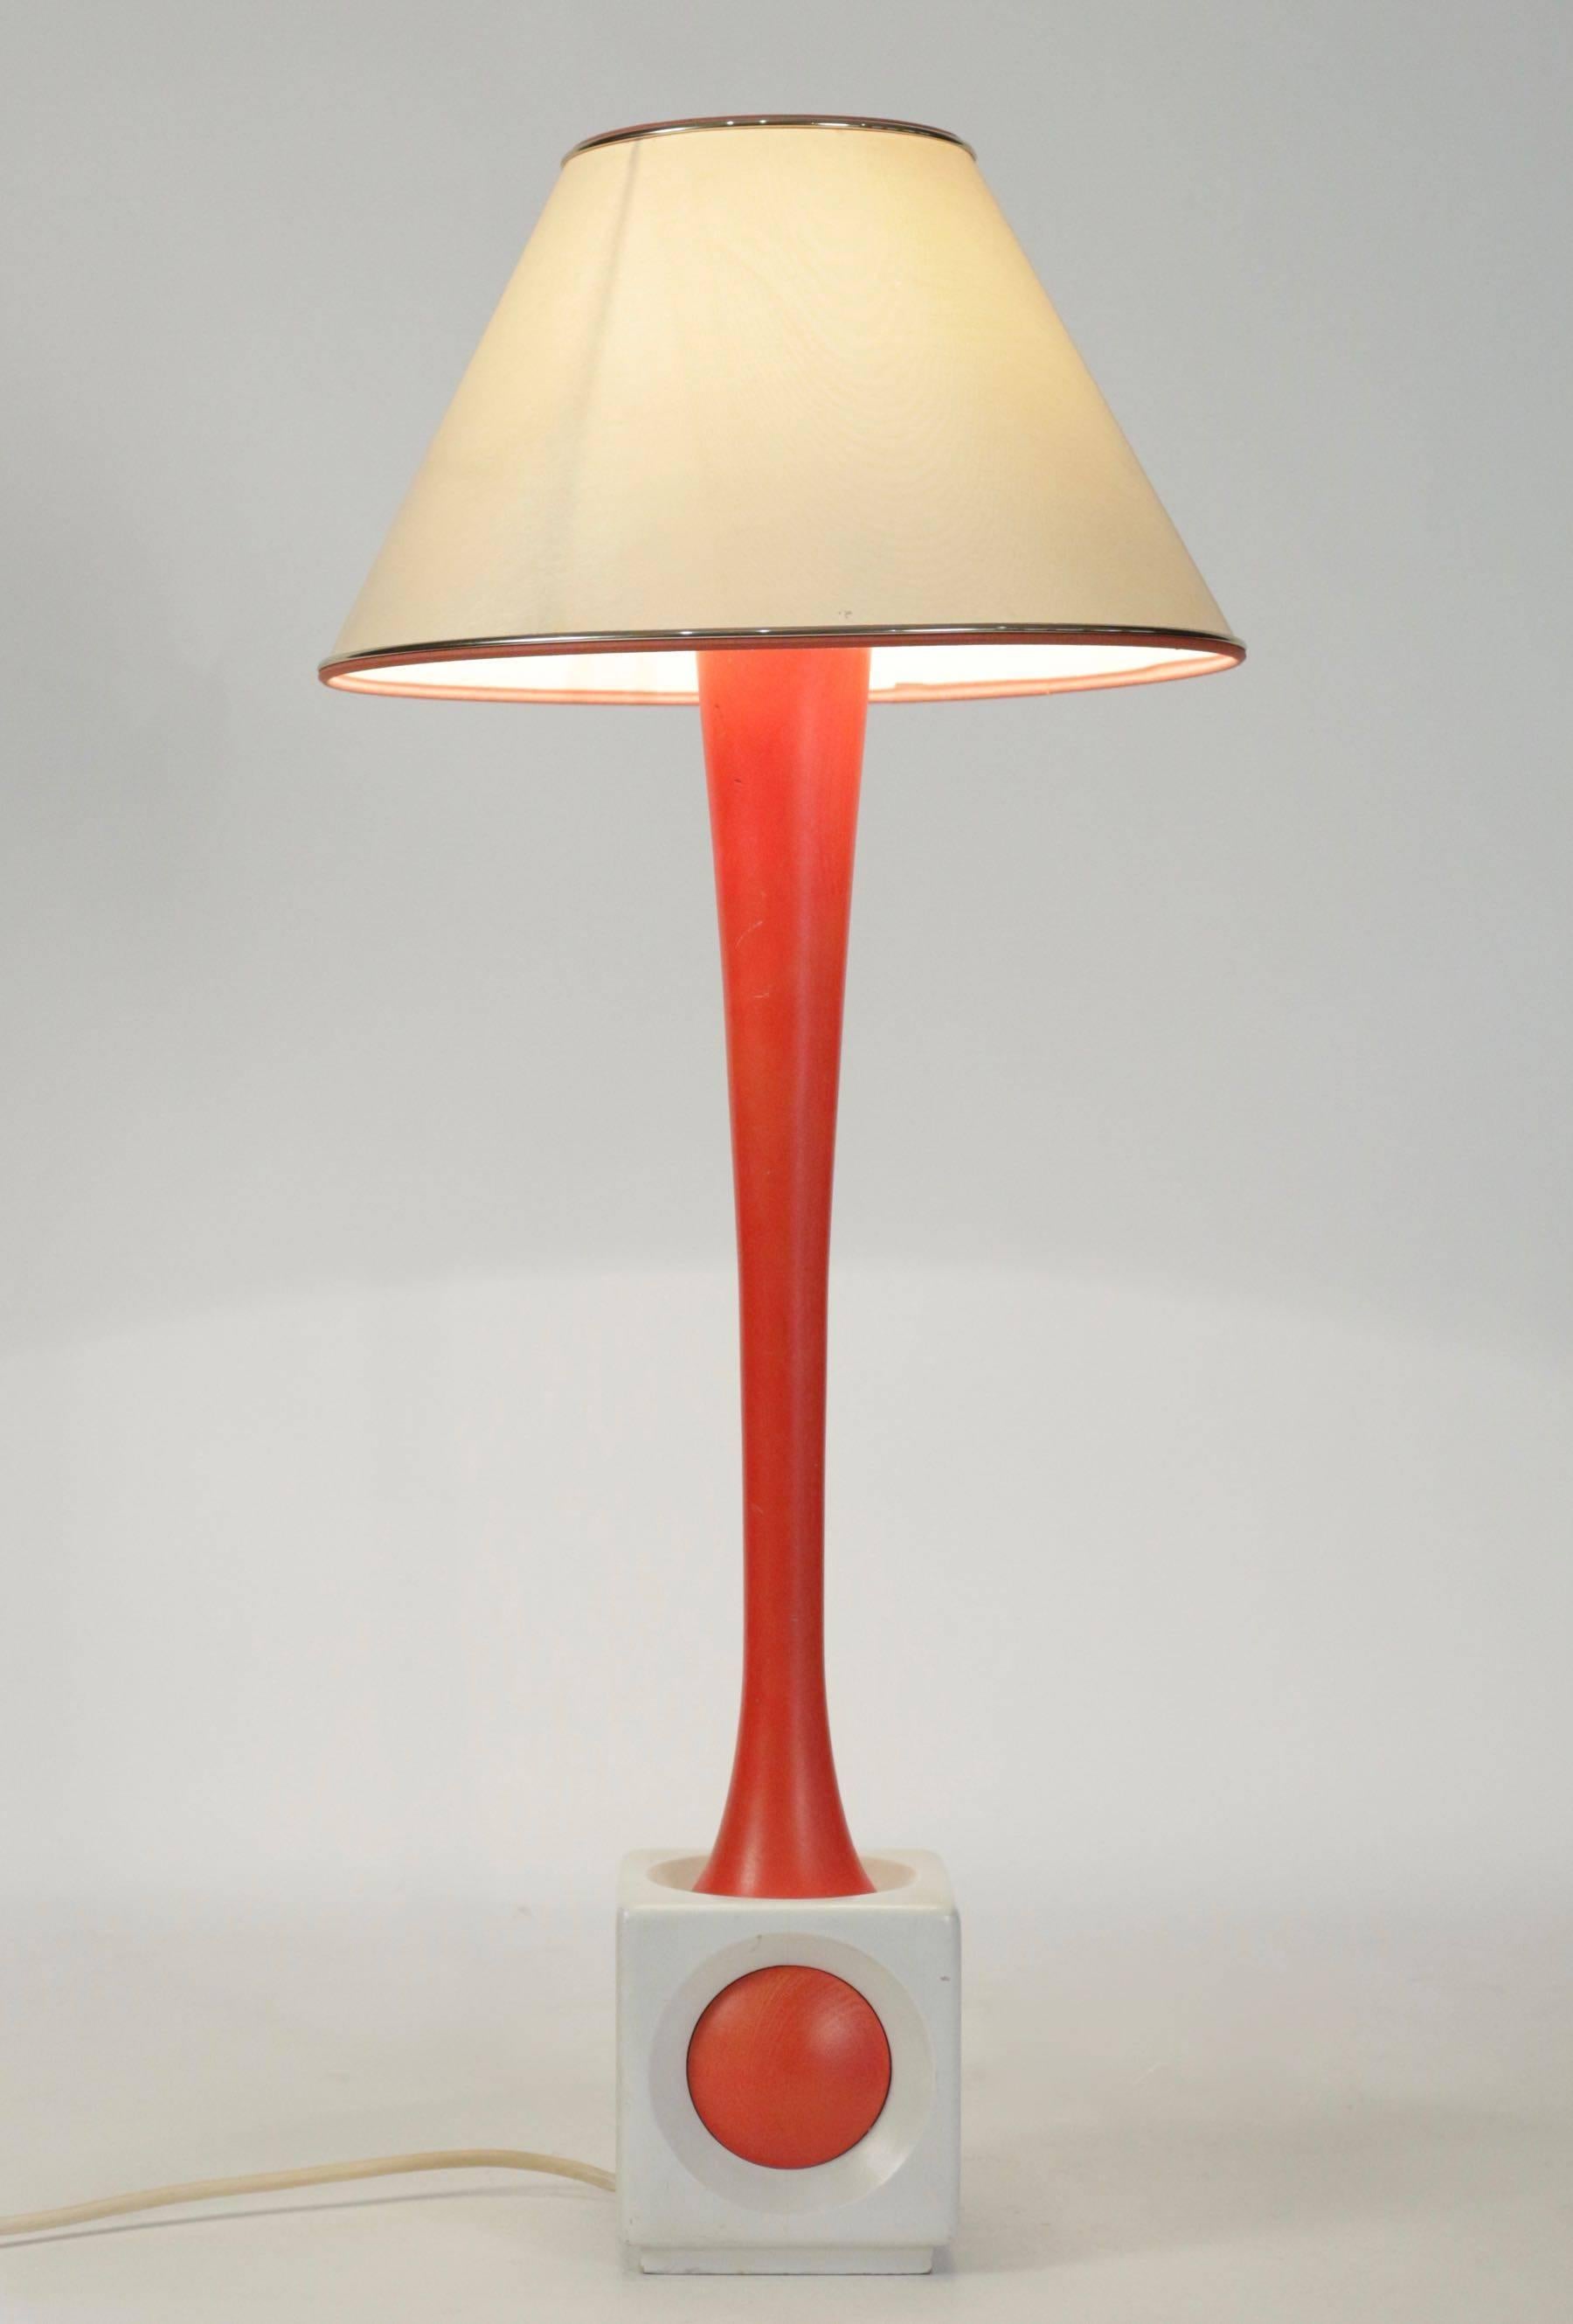 Lamp of Wood Painted Orange and White, circa 1960, Midcentury Design In Good Condition For Sale In Saint-Ouen, FR